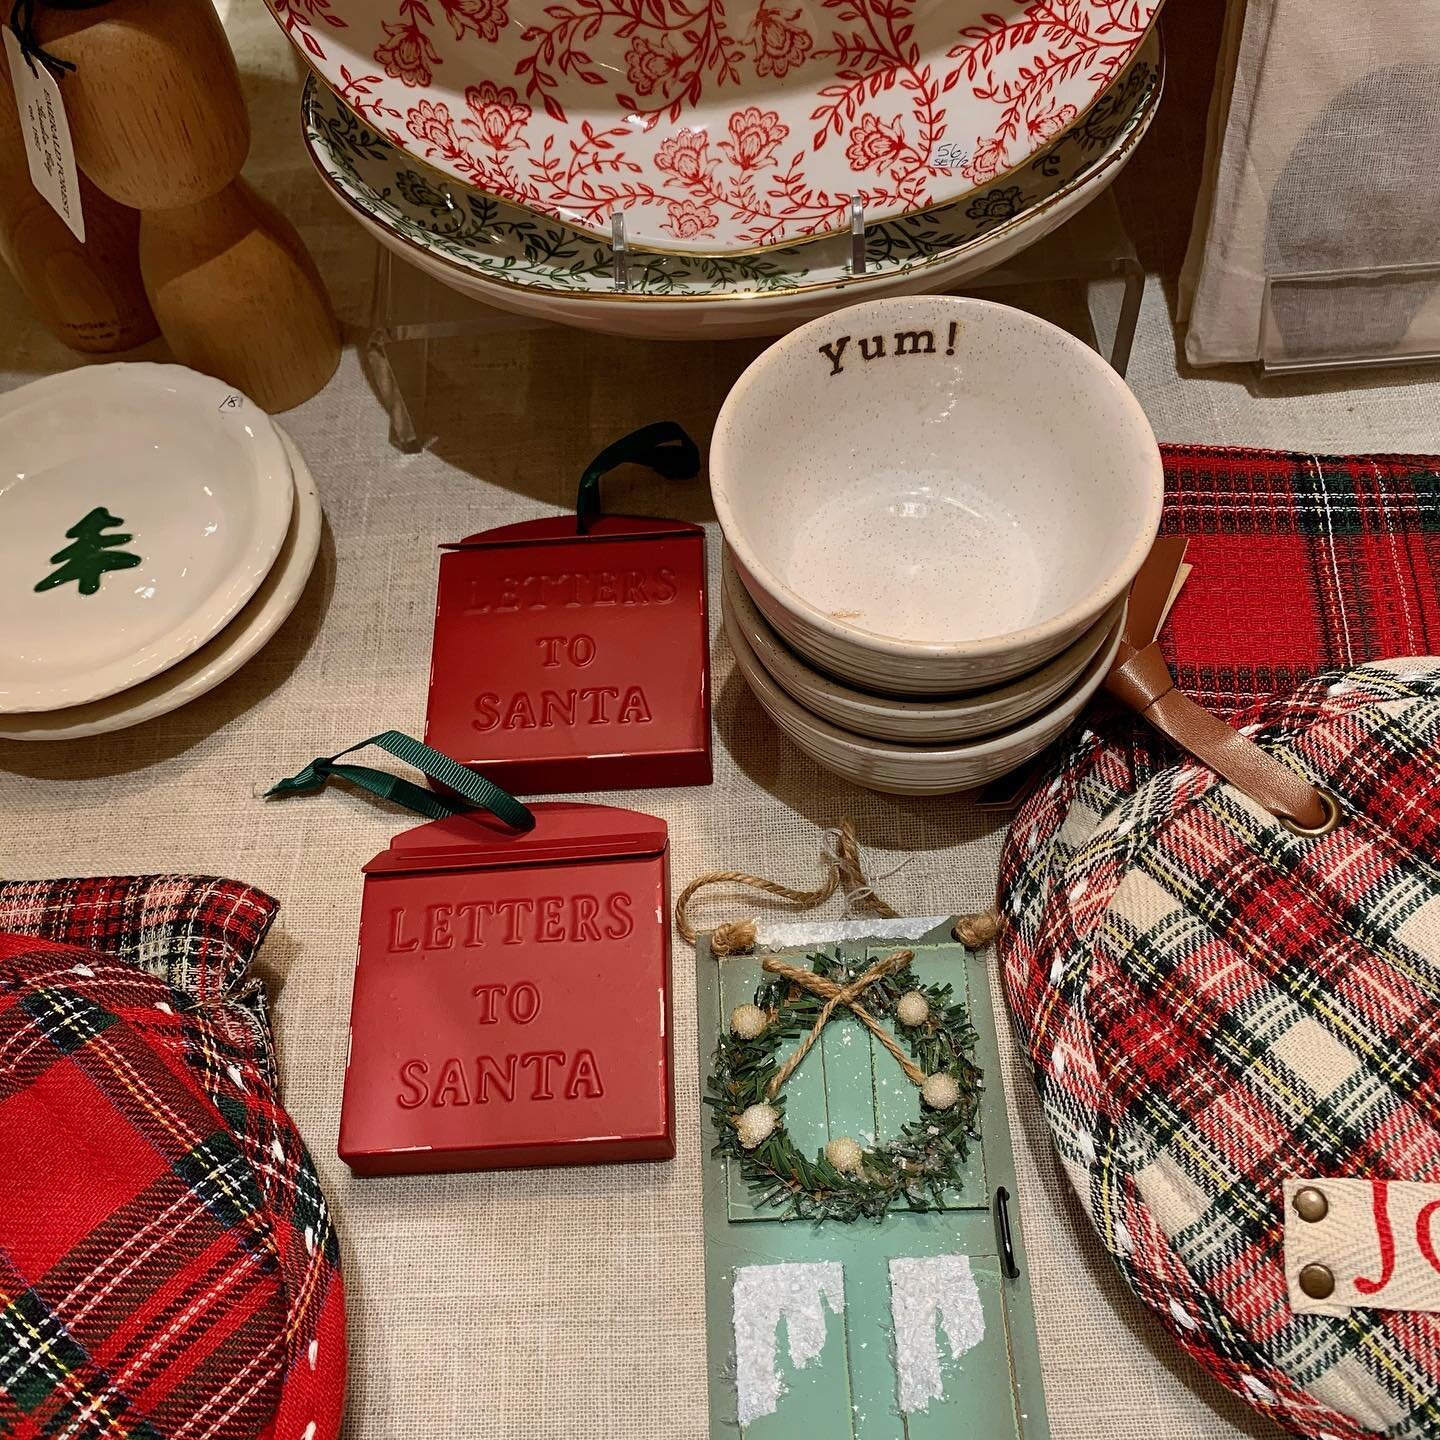 Holiday goodies still to be had. Come let us help you fill your stockings and put beautifully wrapped gifts under your tree 🌲 #christmasgifts #ornaments #stockingstuffers #giftideas #locallove #studiocityshopping #giftguide #lashopping